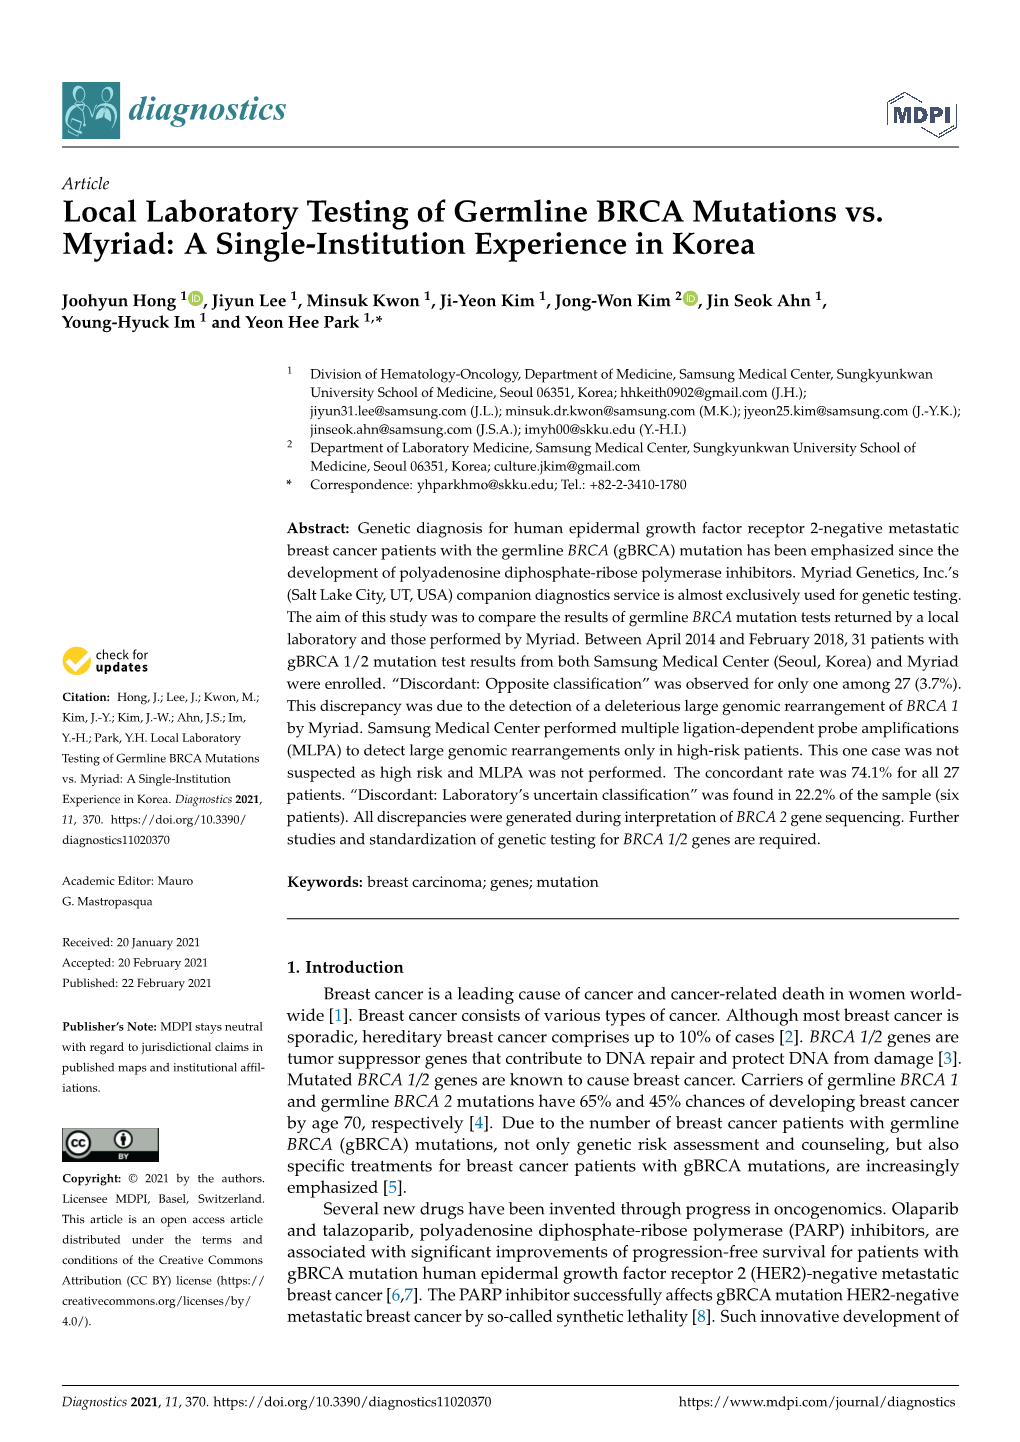 Local Laboratory Testing of Germline BRCA Mutations Vs. Myriad: a Single-Institution Experience in Korea